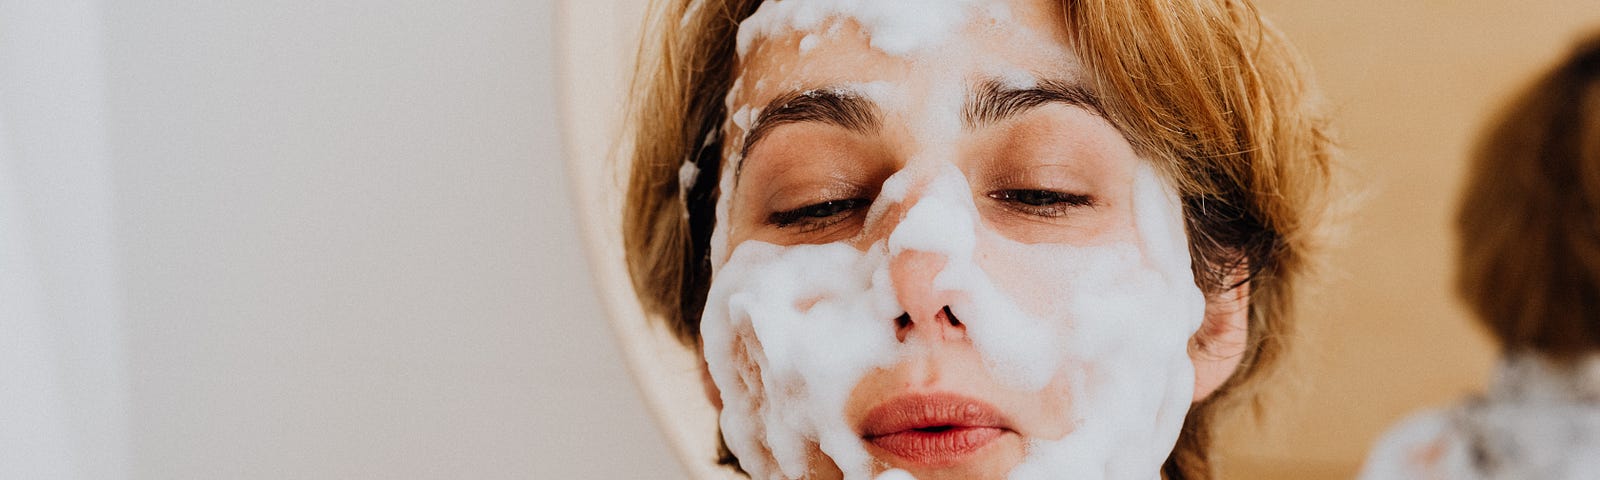 A woman with foamy facial wash on her face. Photo by Karolina Grabowska: https://www.pexels.com/photo/a-woman-with-foamy-facial-wash-on-her-face-5240368/